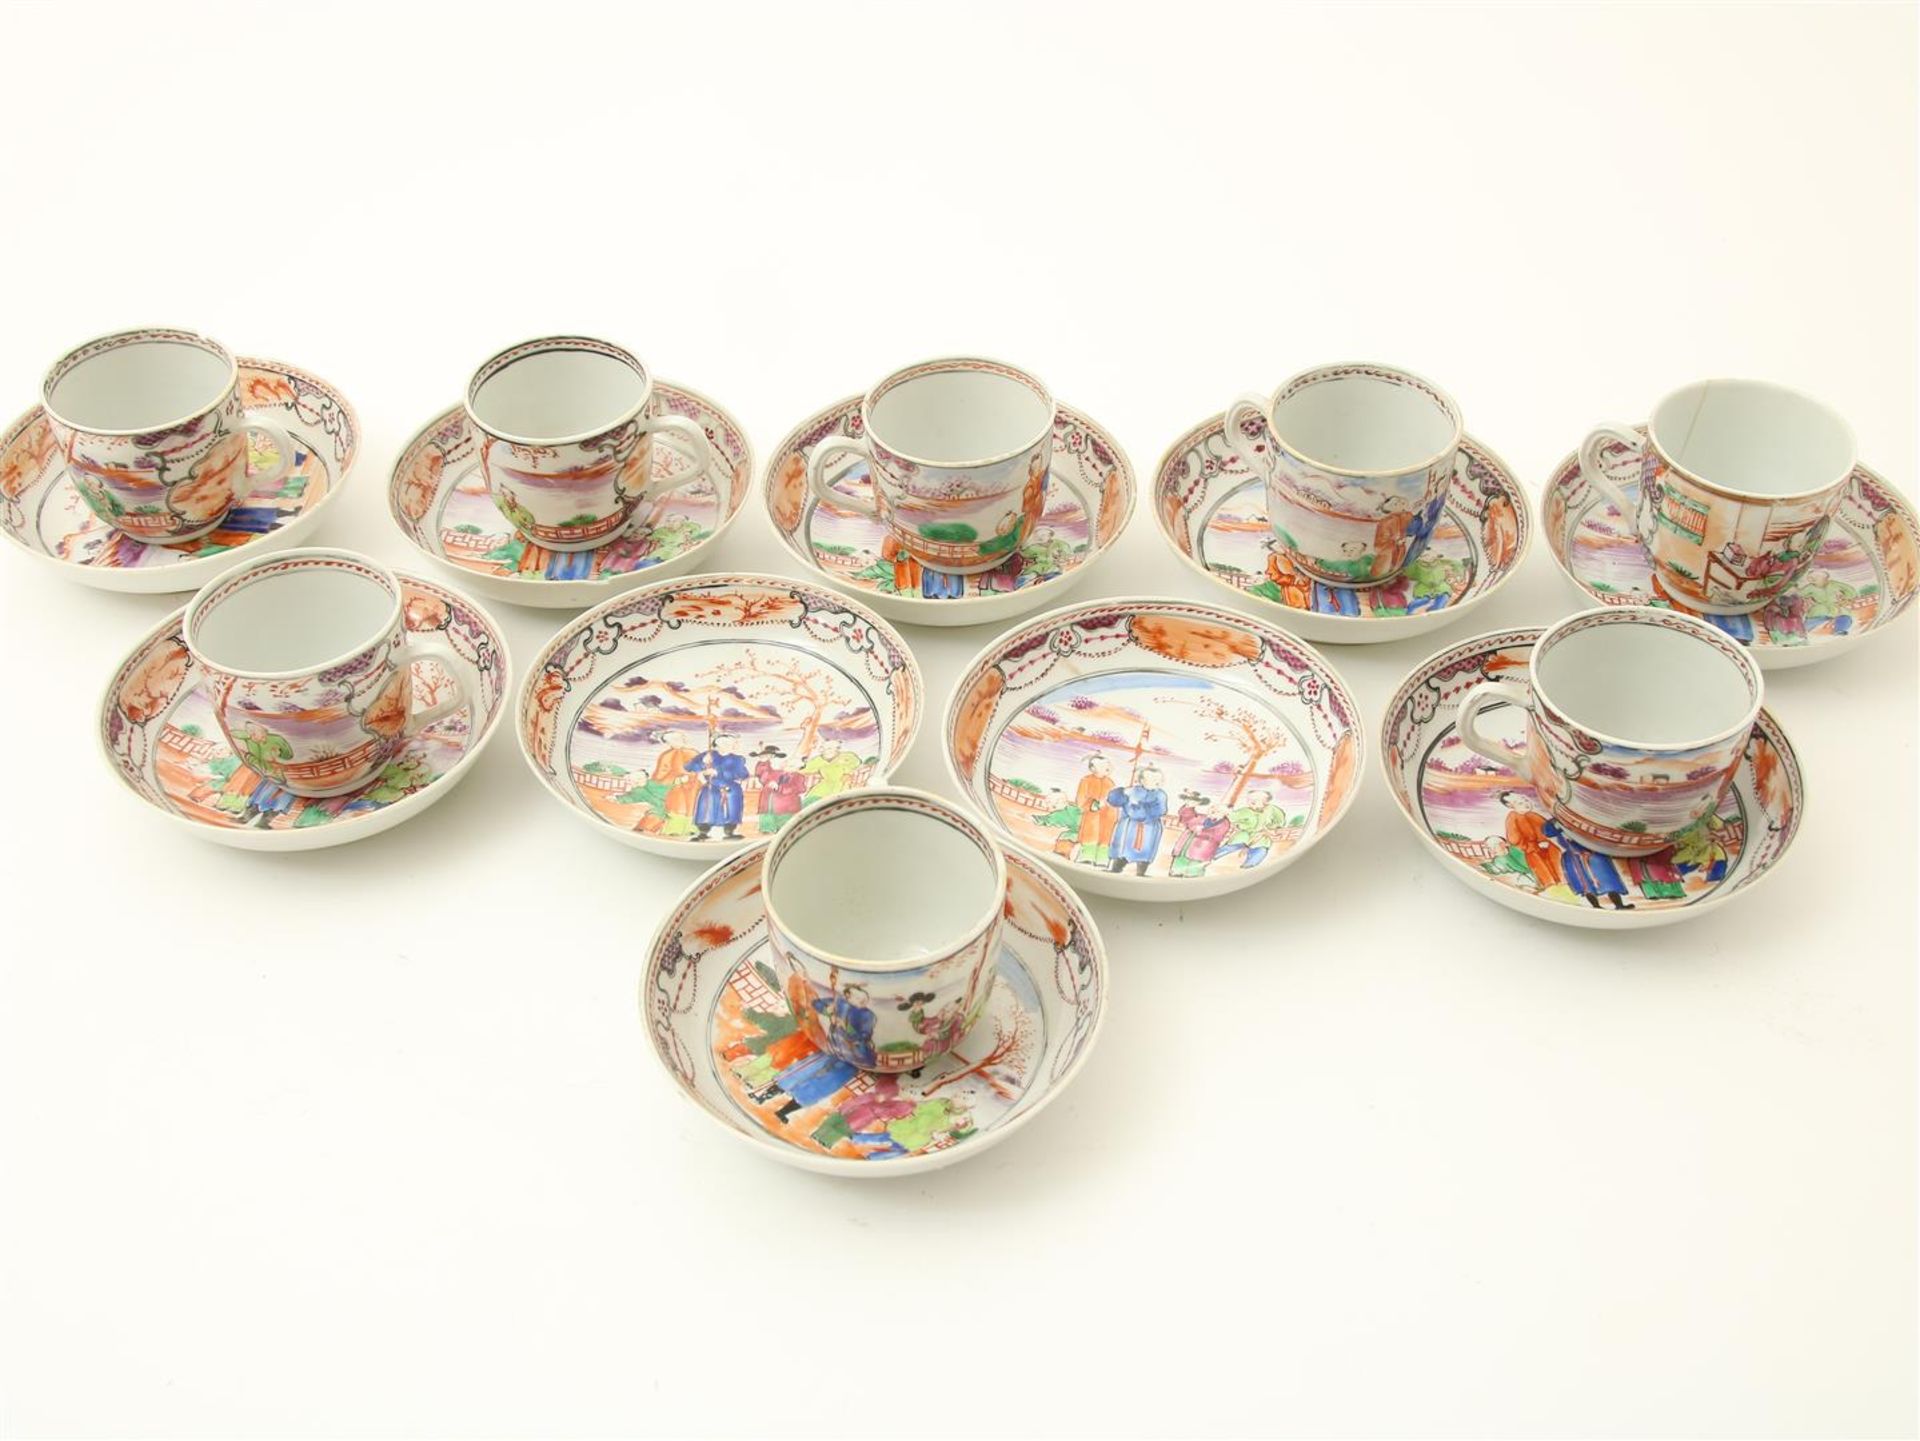 Series of 8 porcelain cups and 10 saucers, China 18th century  - Bild 2 aus 7